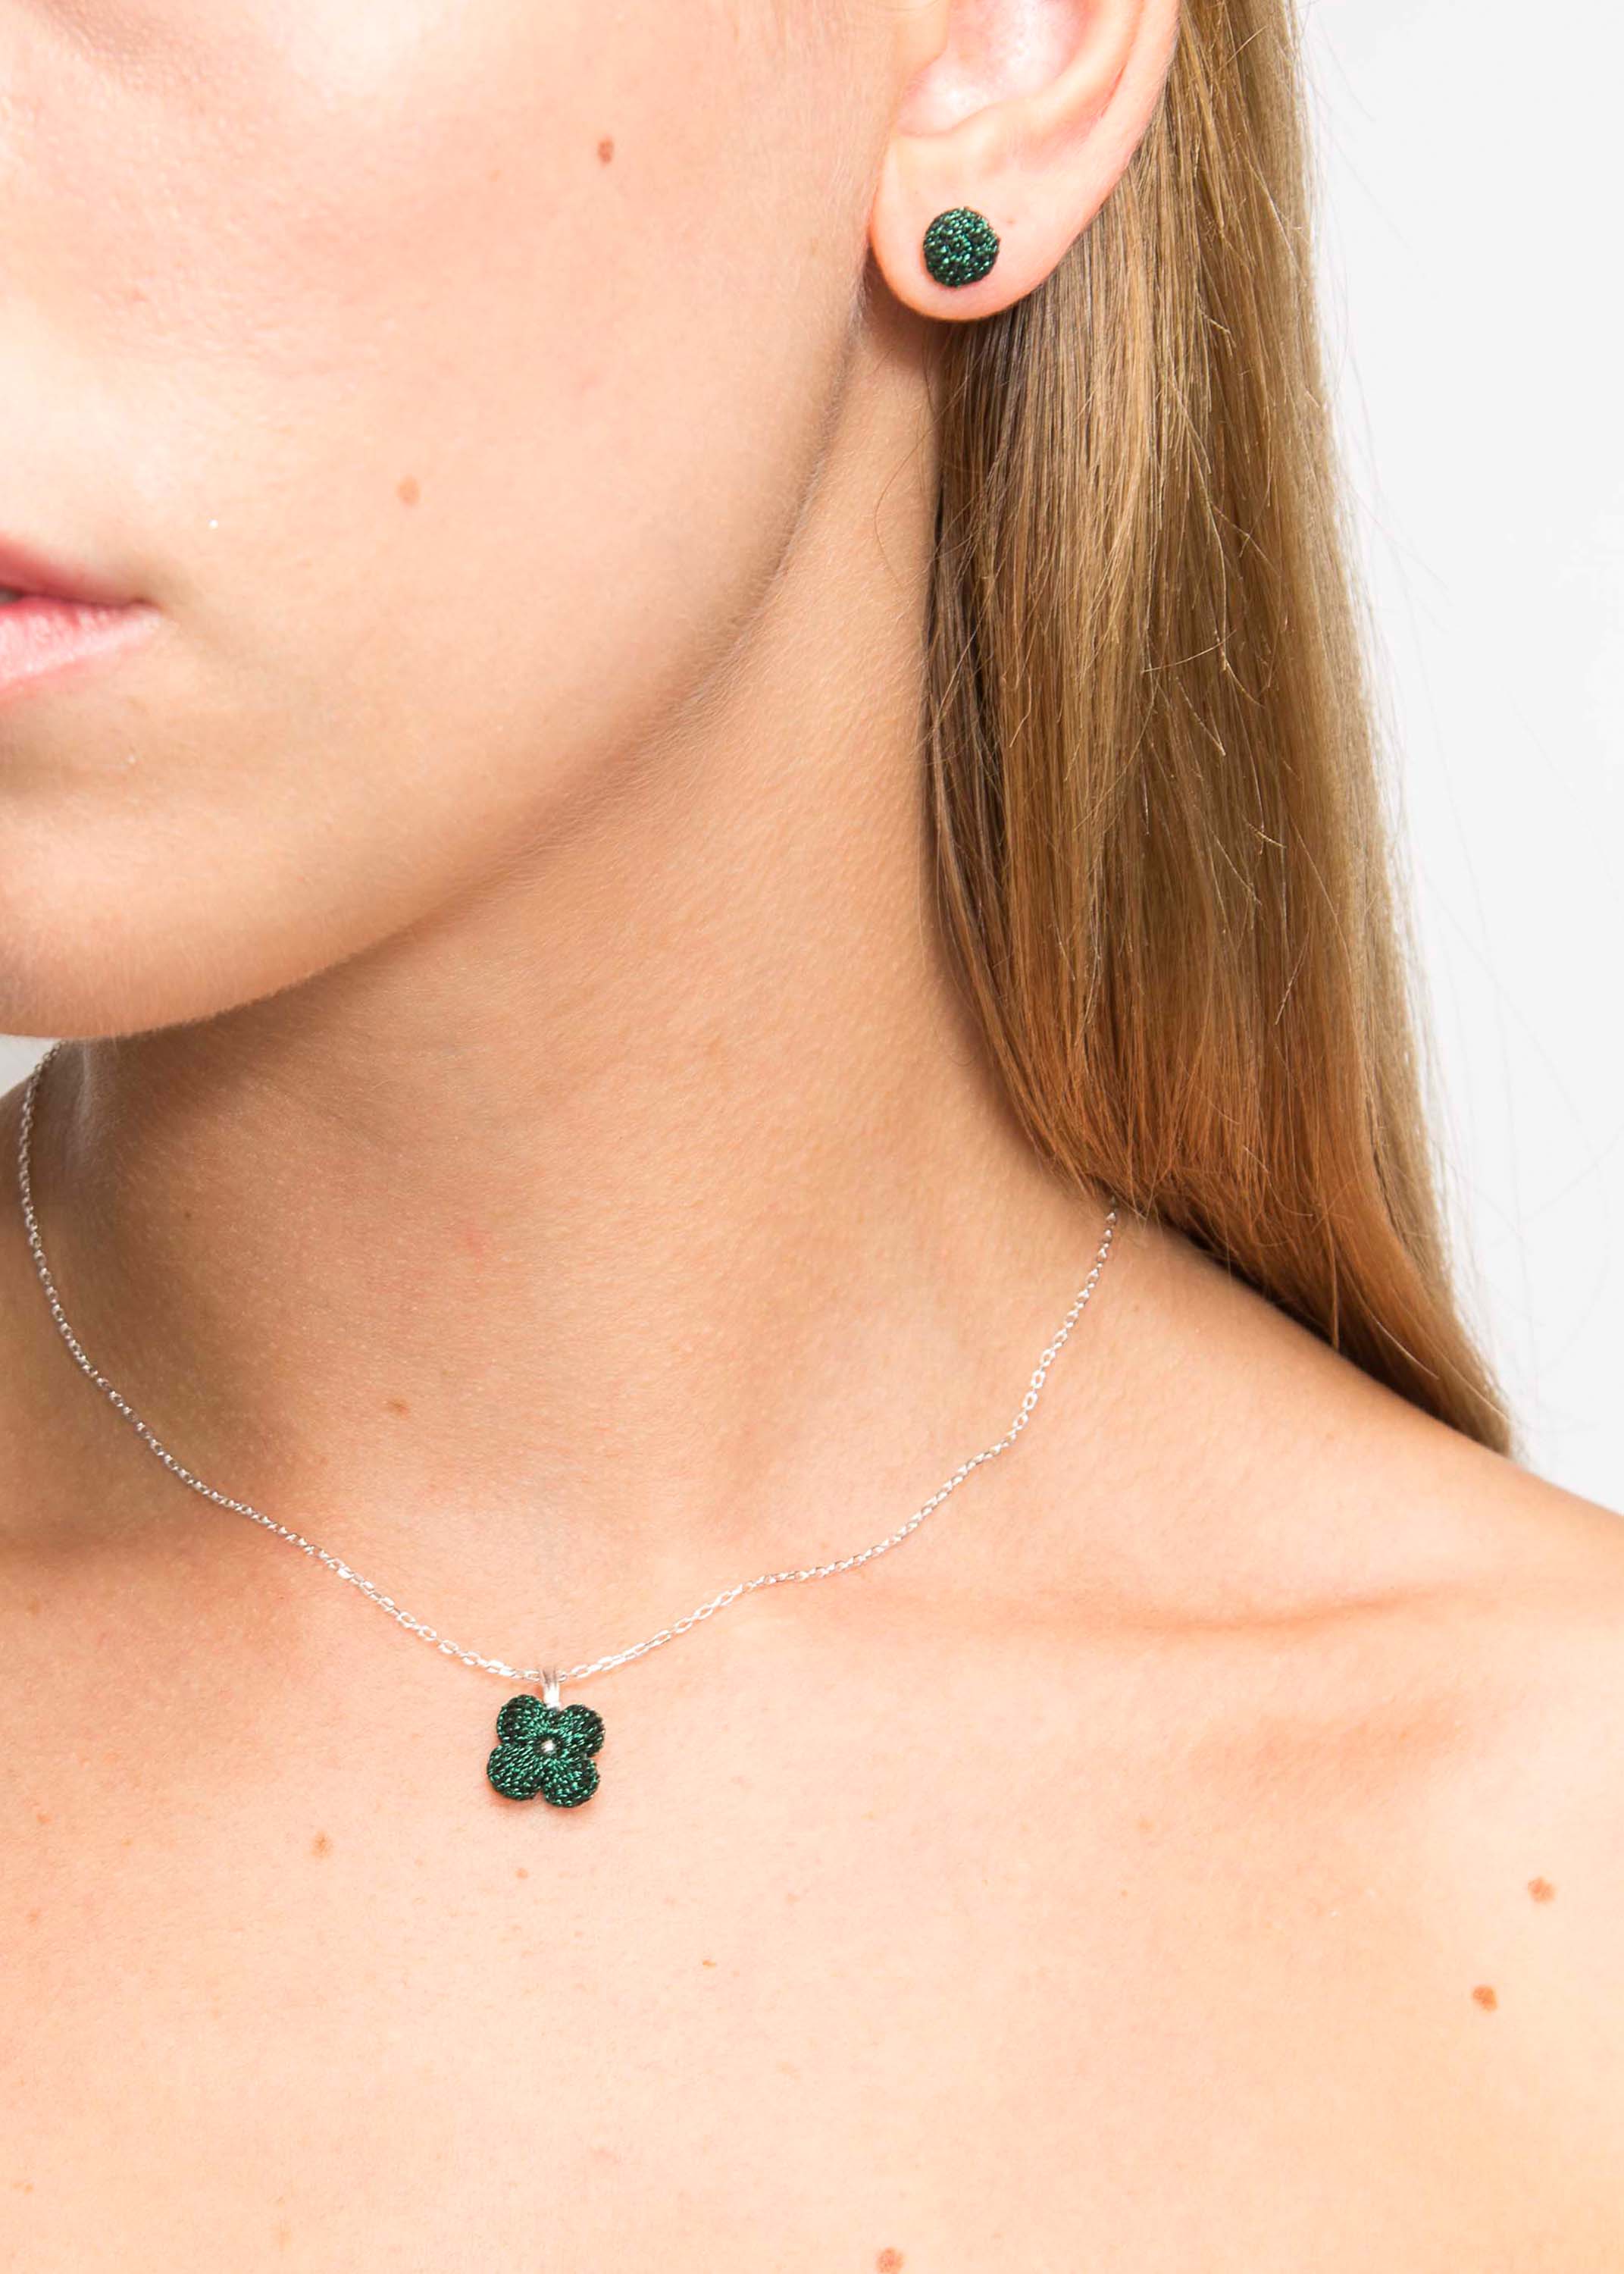 Green Flower Necklace - Everyday Sparkles